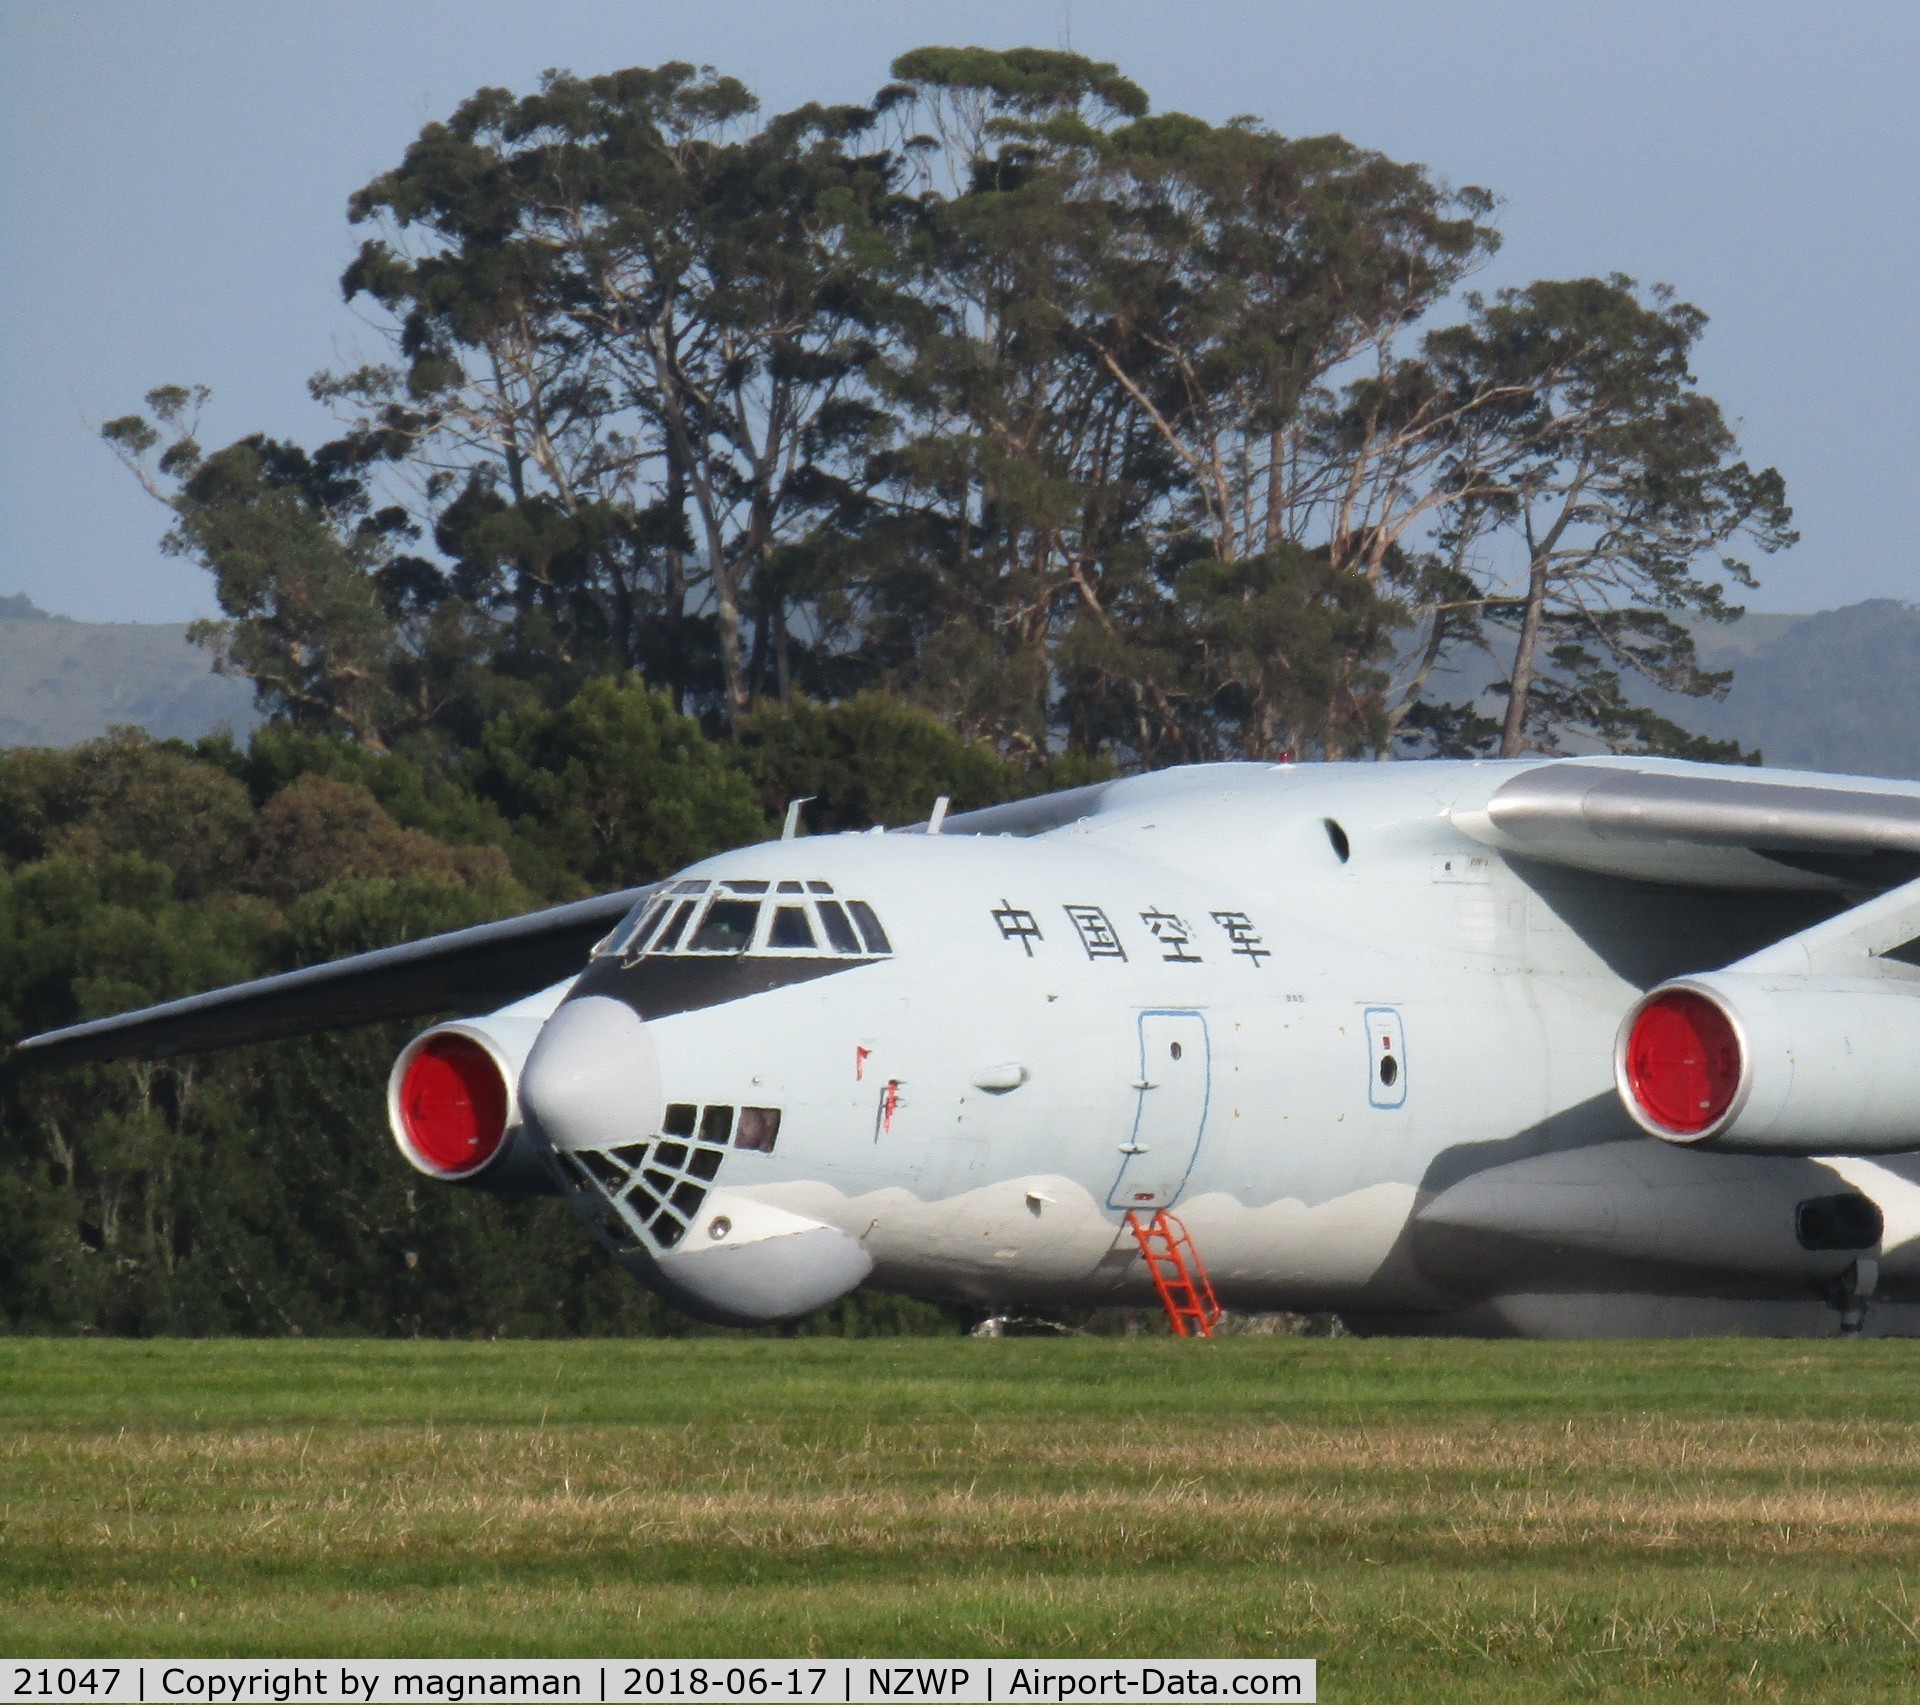 21047, 1993 Ilyushin IL-76MD C/N 1033417550, At Whenuapai on joint exercise - not stretching its muscles today though.